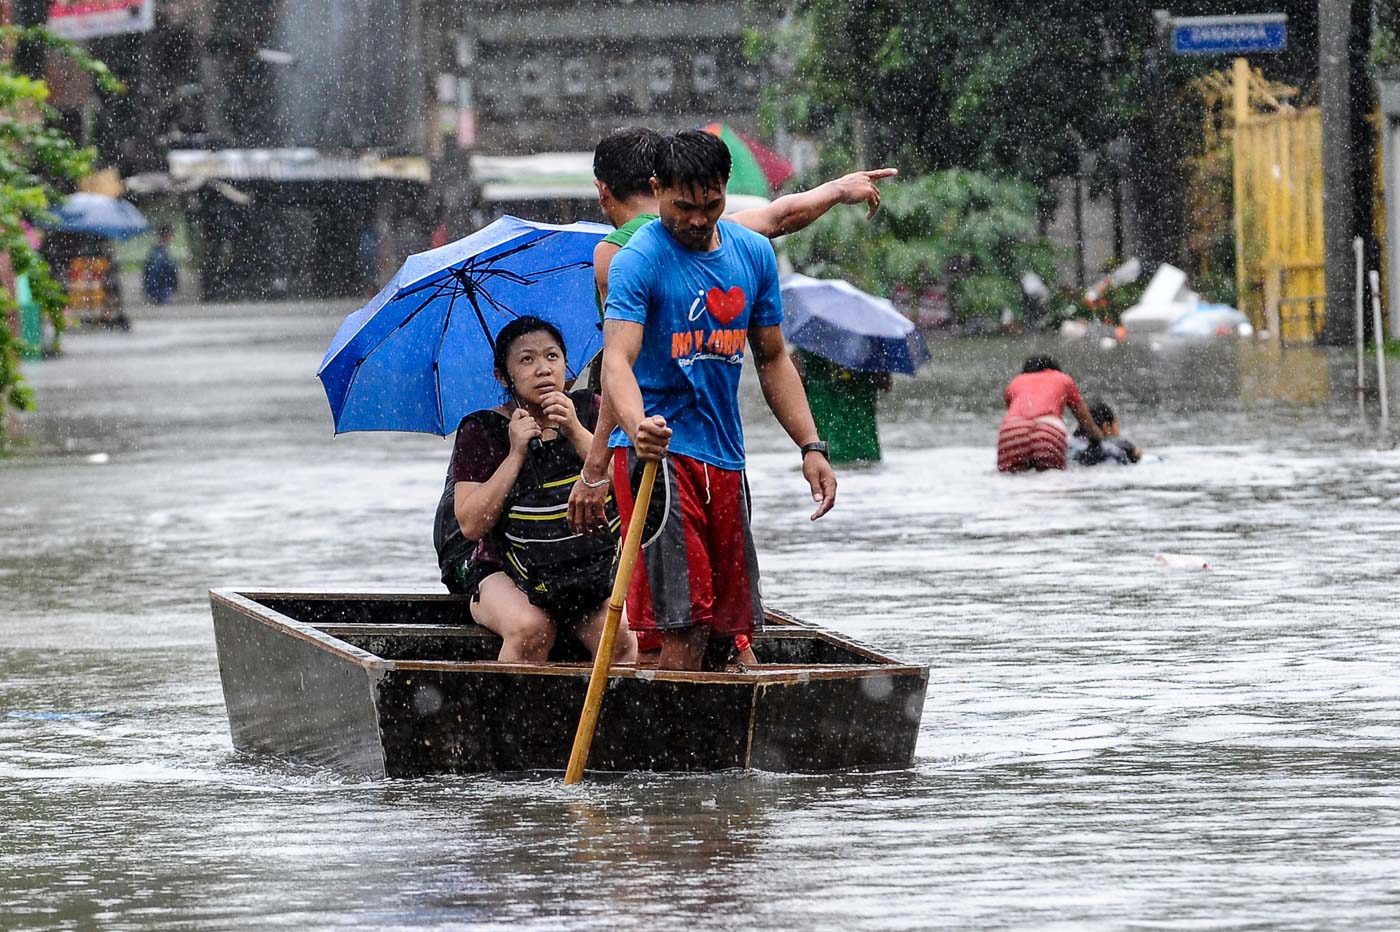 IN PHOTOS: Flooded areas in Metro Manila on July 17